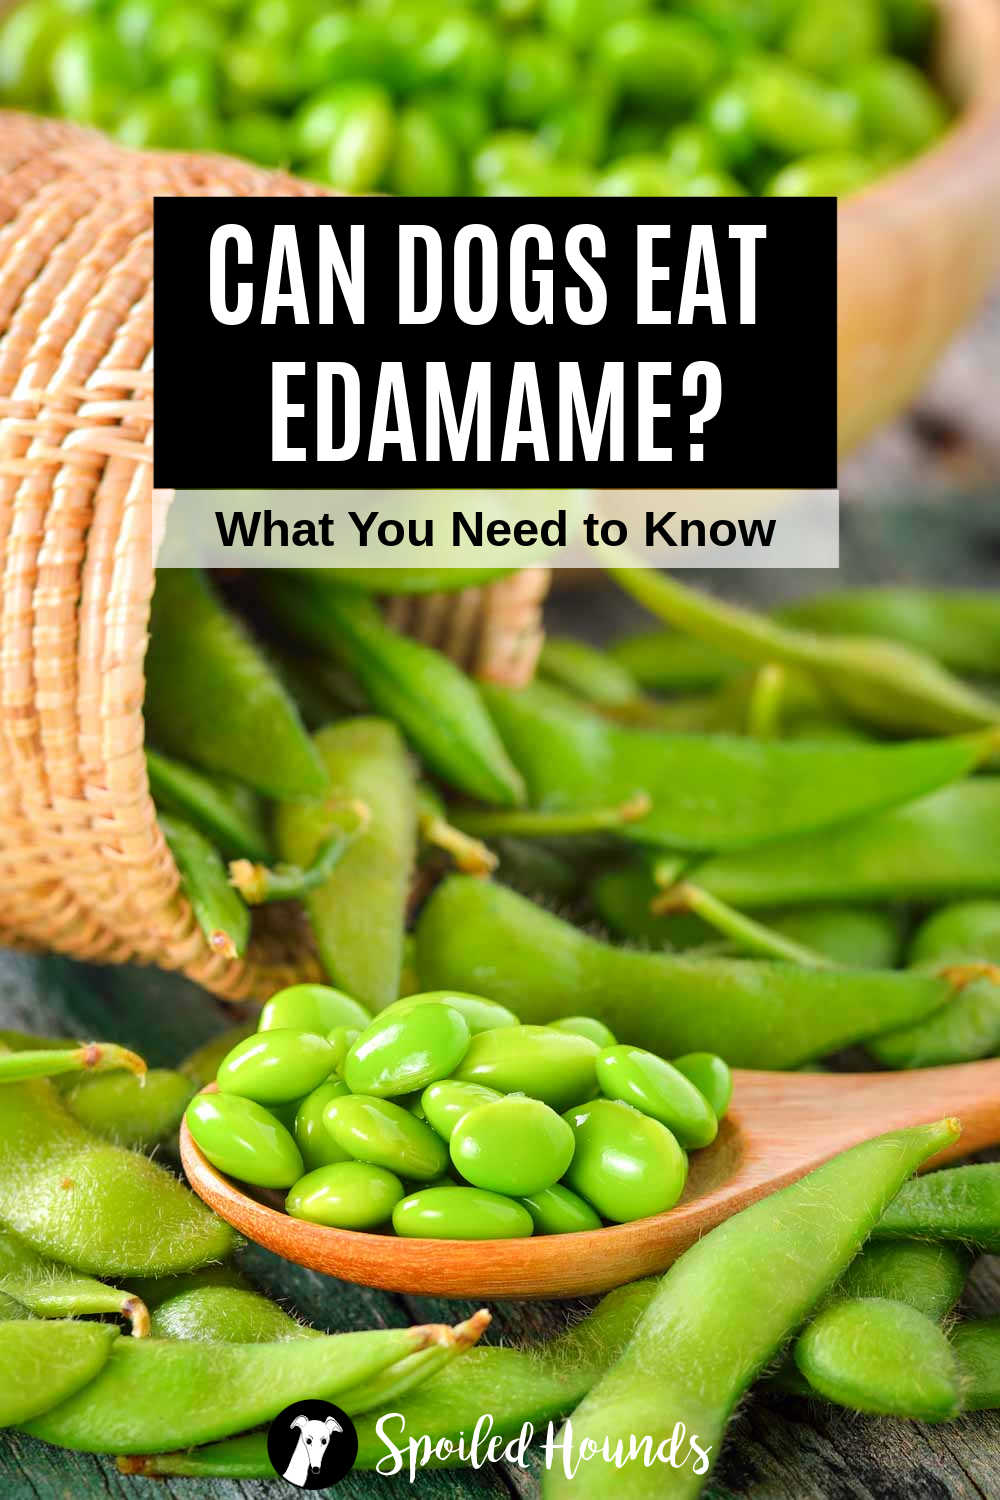 fresh edamame pods and beans.